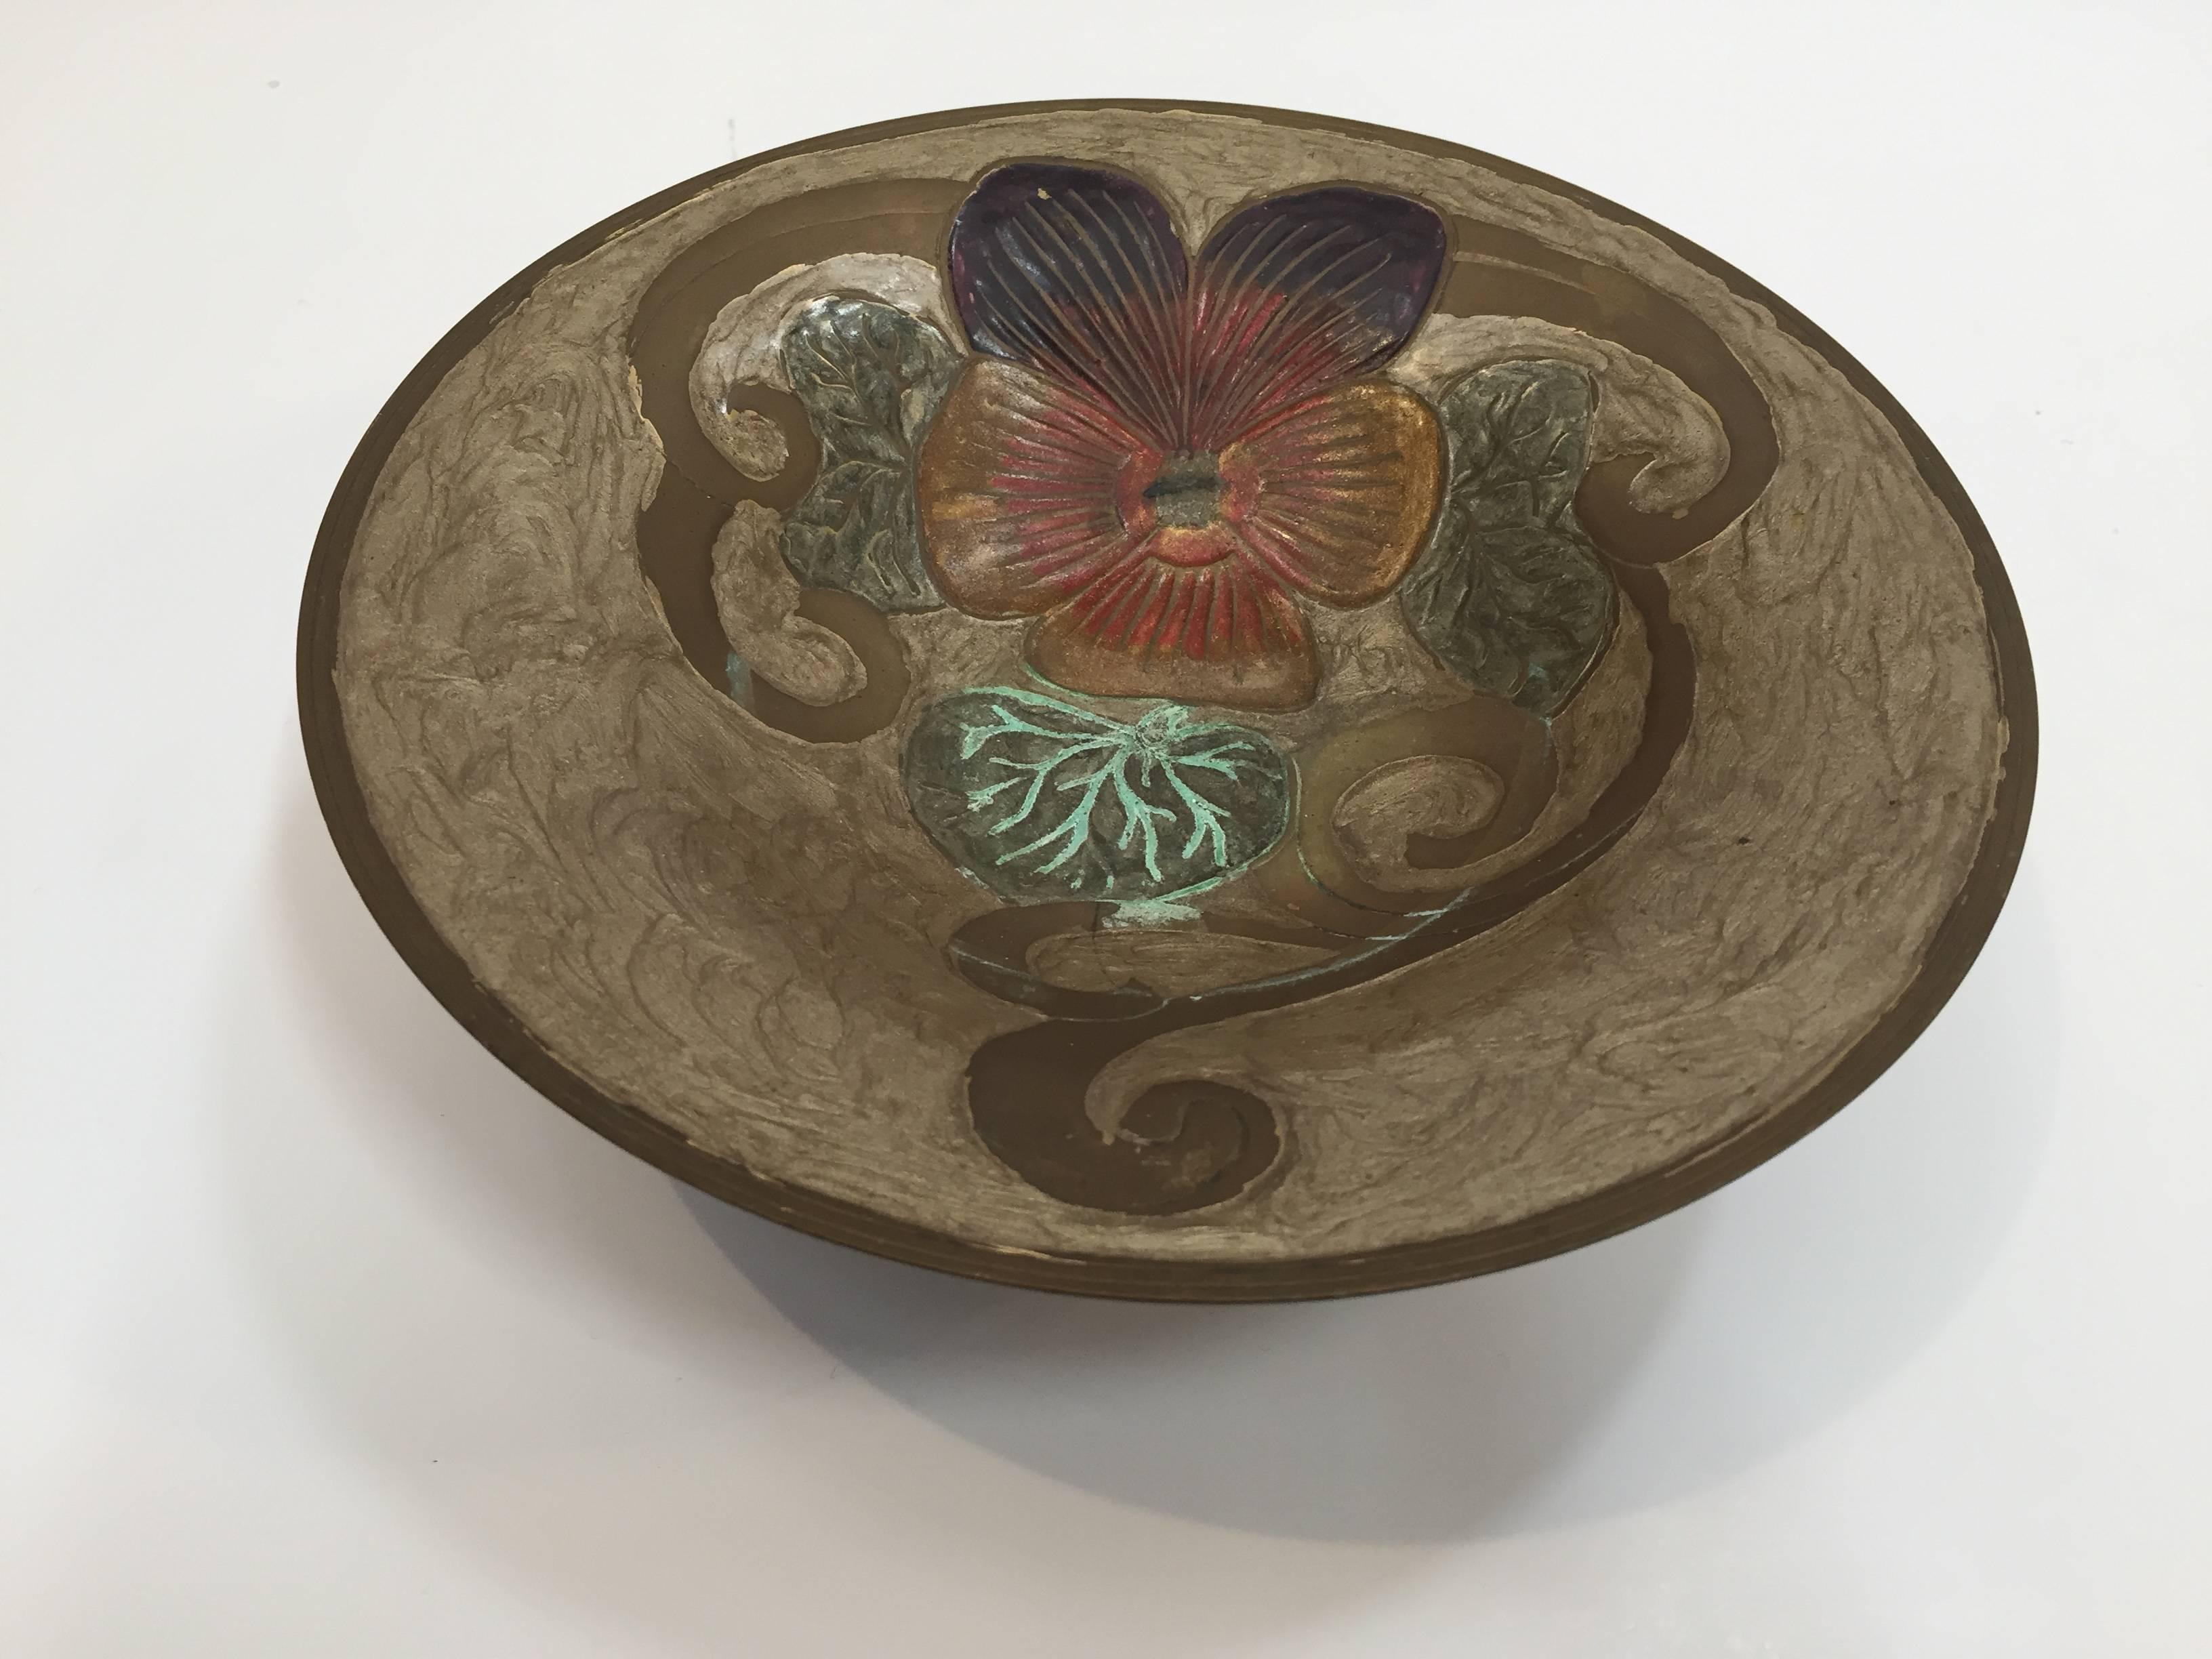 Art Nouveau A Delbaux brass enameled catchall, vide poche, change holder, footed bowl.
Hand-painted flowers, chased designs, made in France,
circa 1940s.
 